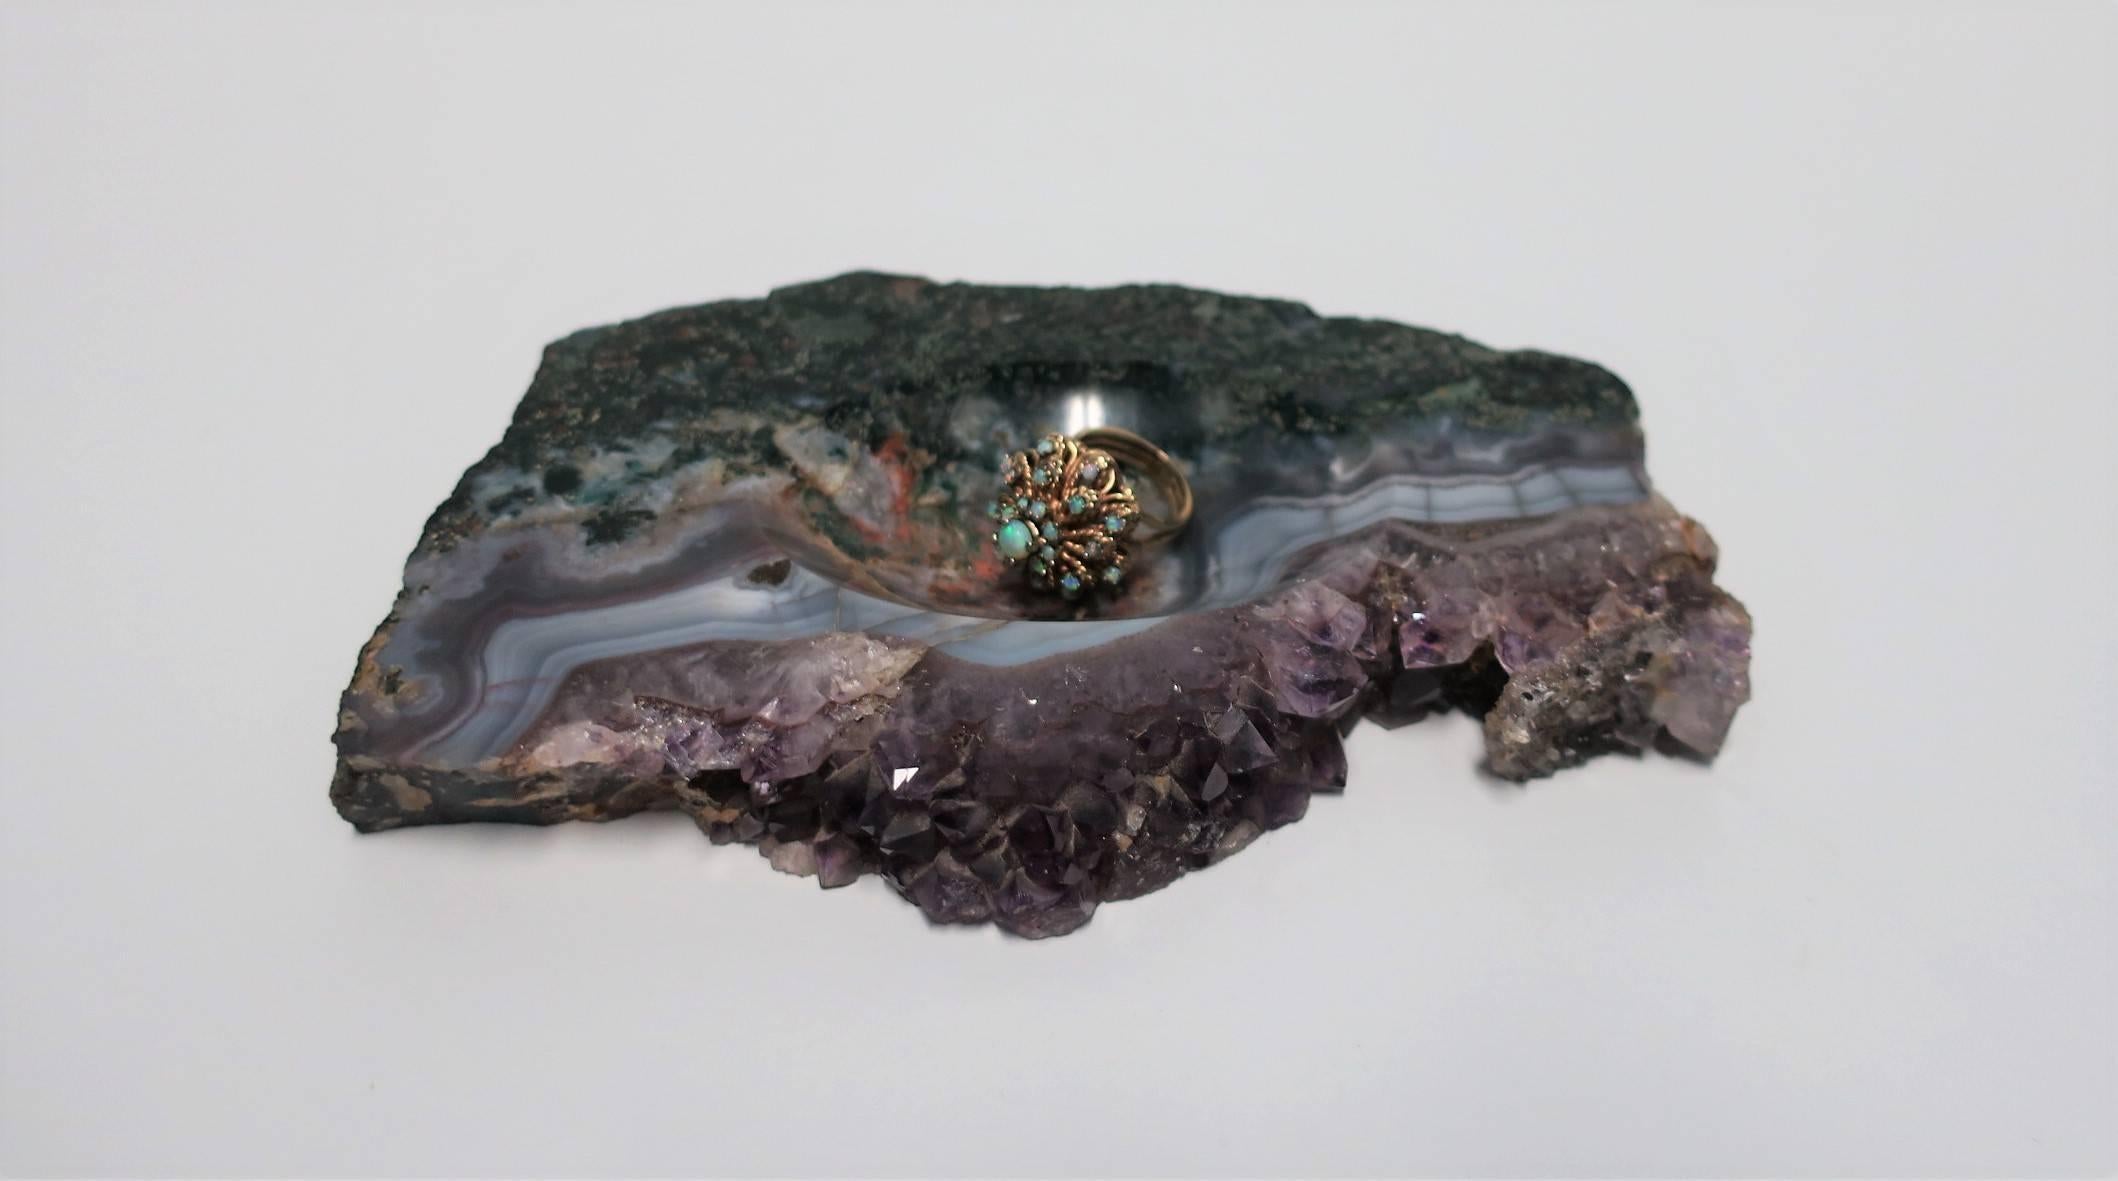 A beautiful natural purple amethyst geode vessel sculpture piece, or, as show in images, a jewelry or trinket dish. Piece can hold any small item(s), perhaps on a nightstand table, vanity, desk, or a standalone decorative object. Beautiful colors